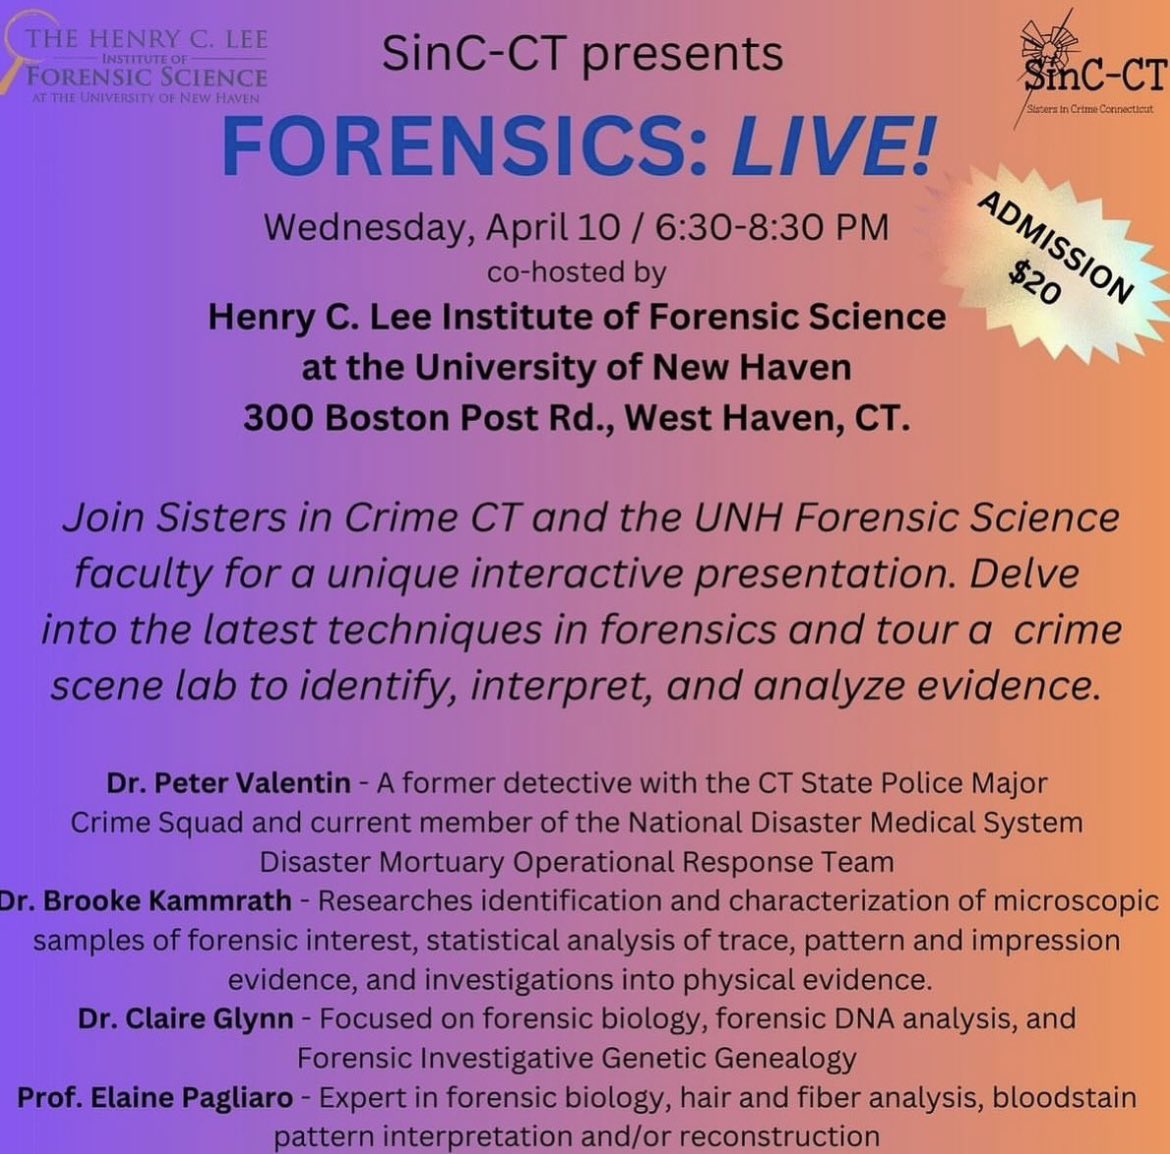 Tonight! Don’t miss this fascinating event at the @UNewHaven!